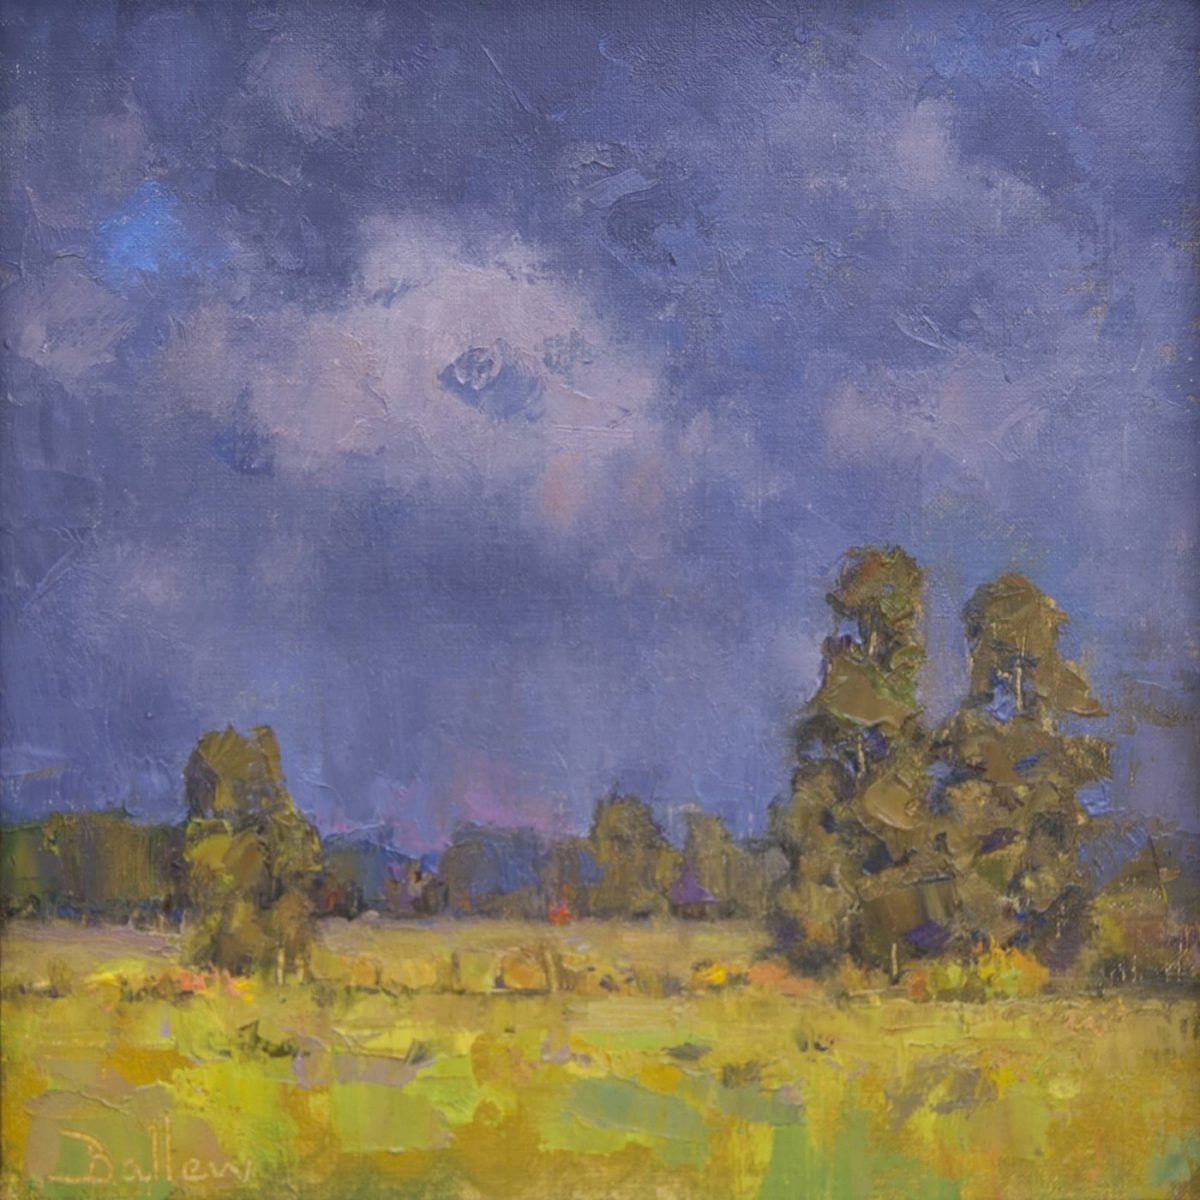 Passing Showers painting by David Ballew